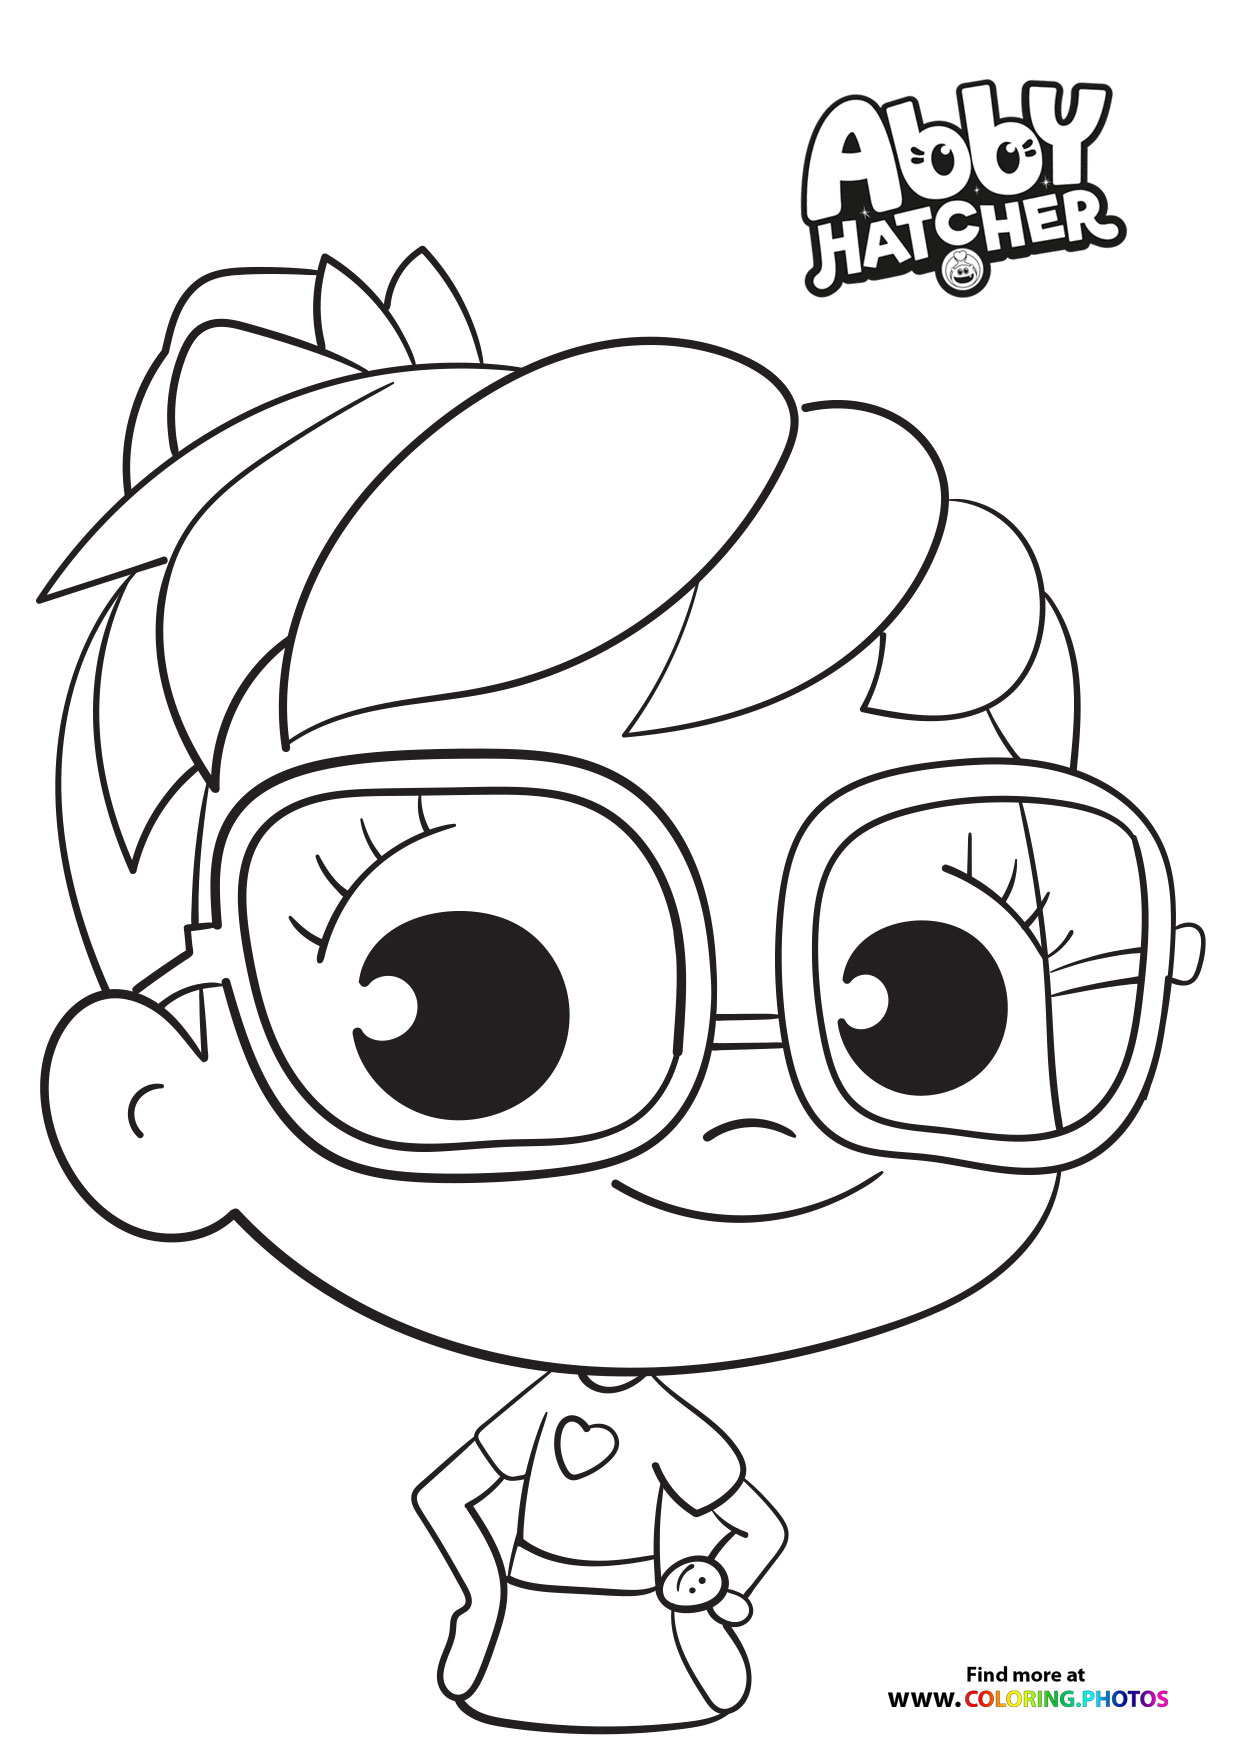 Abby Hatcher Coloring Pages Free - boringpop.com